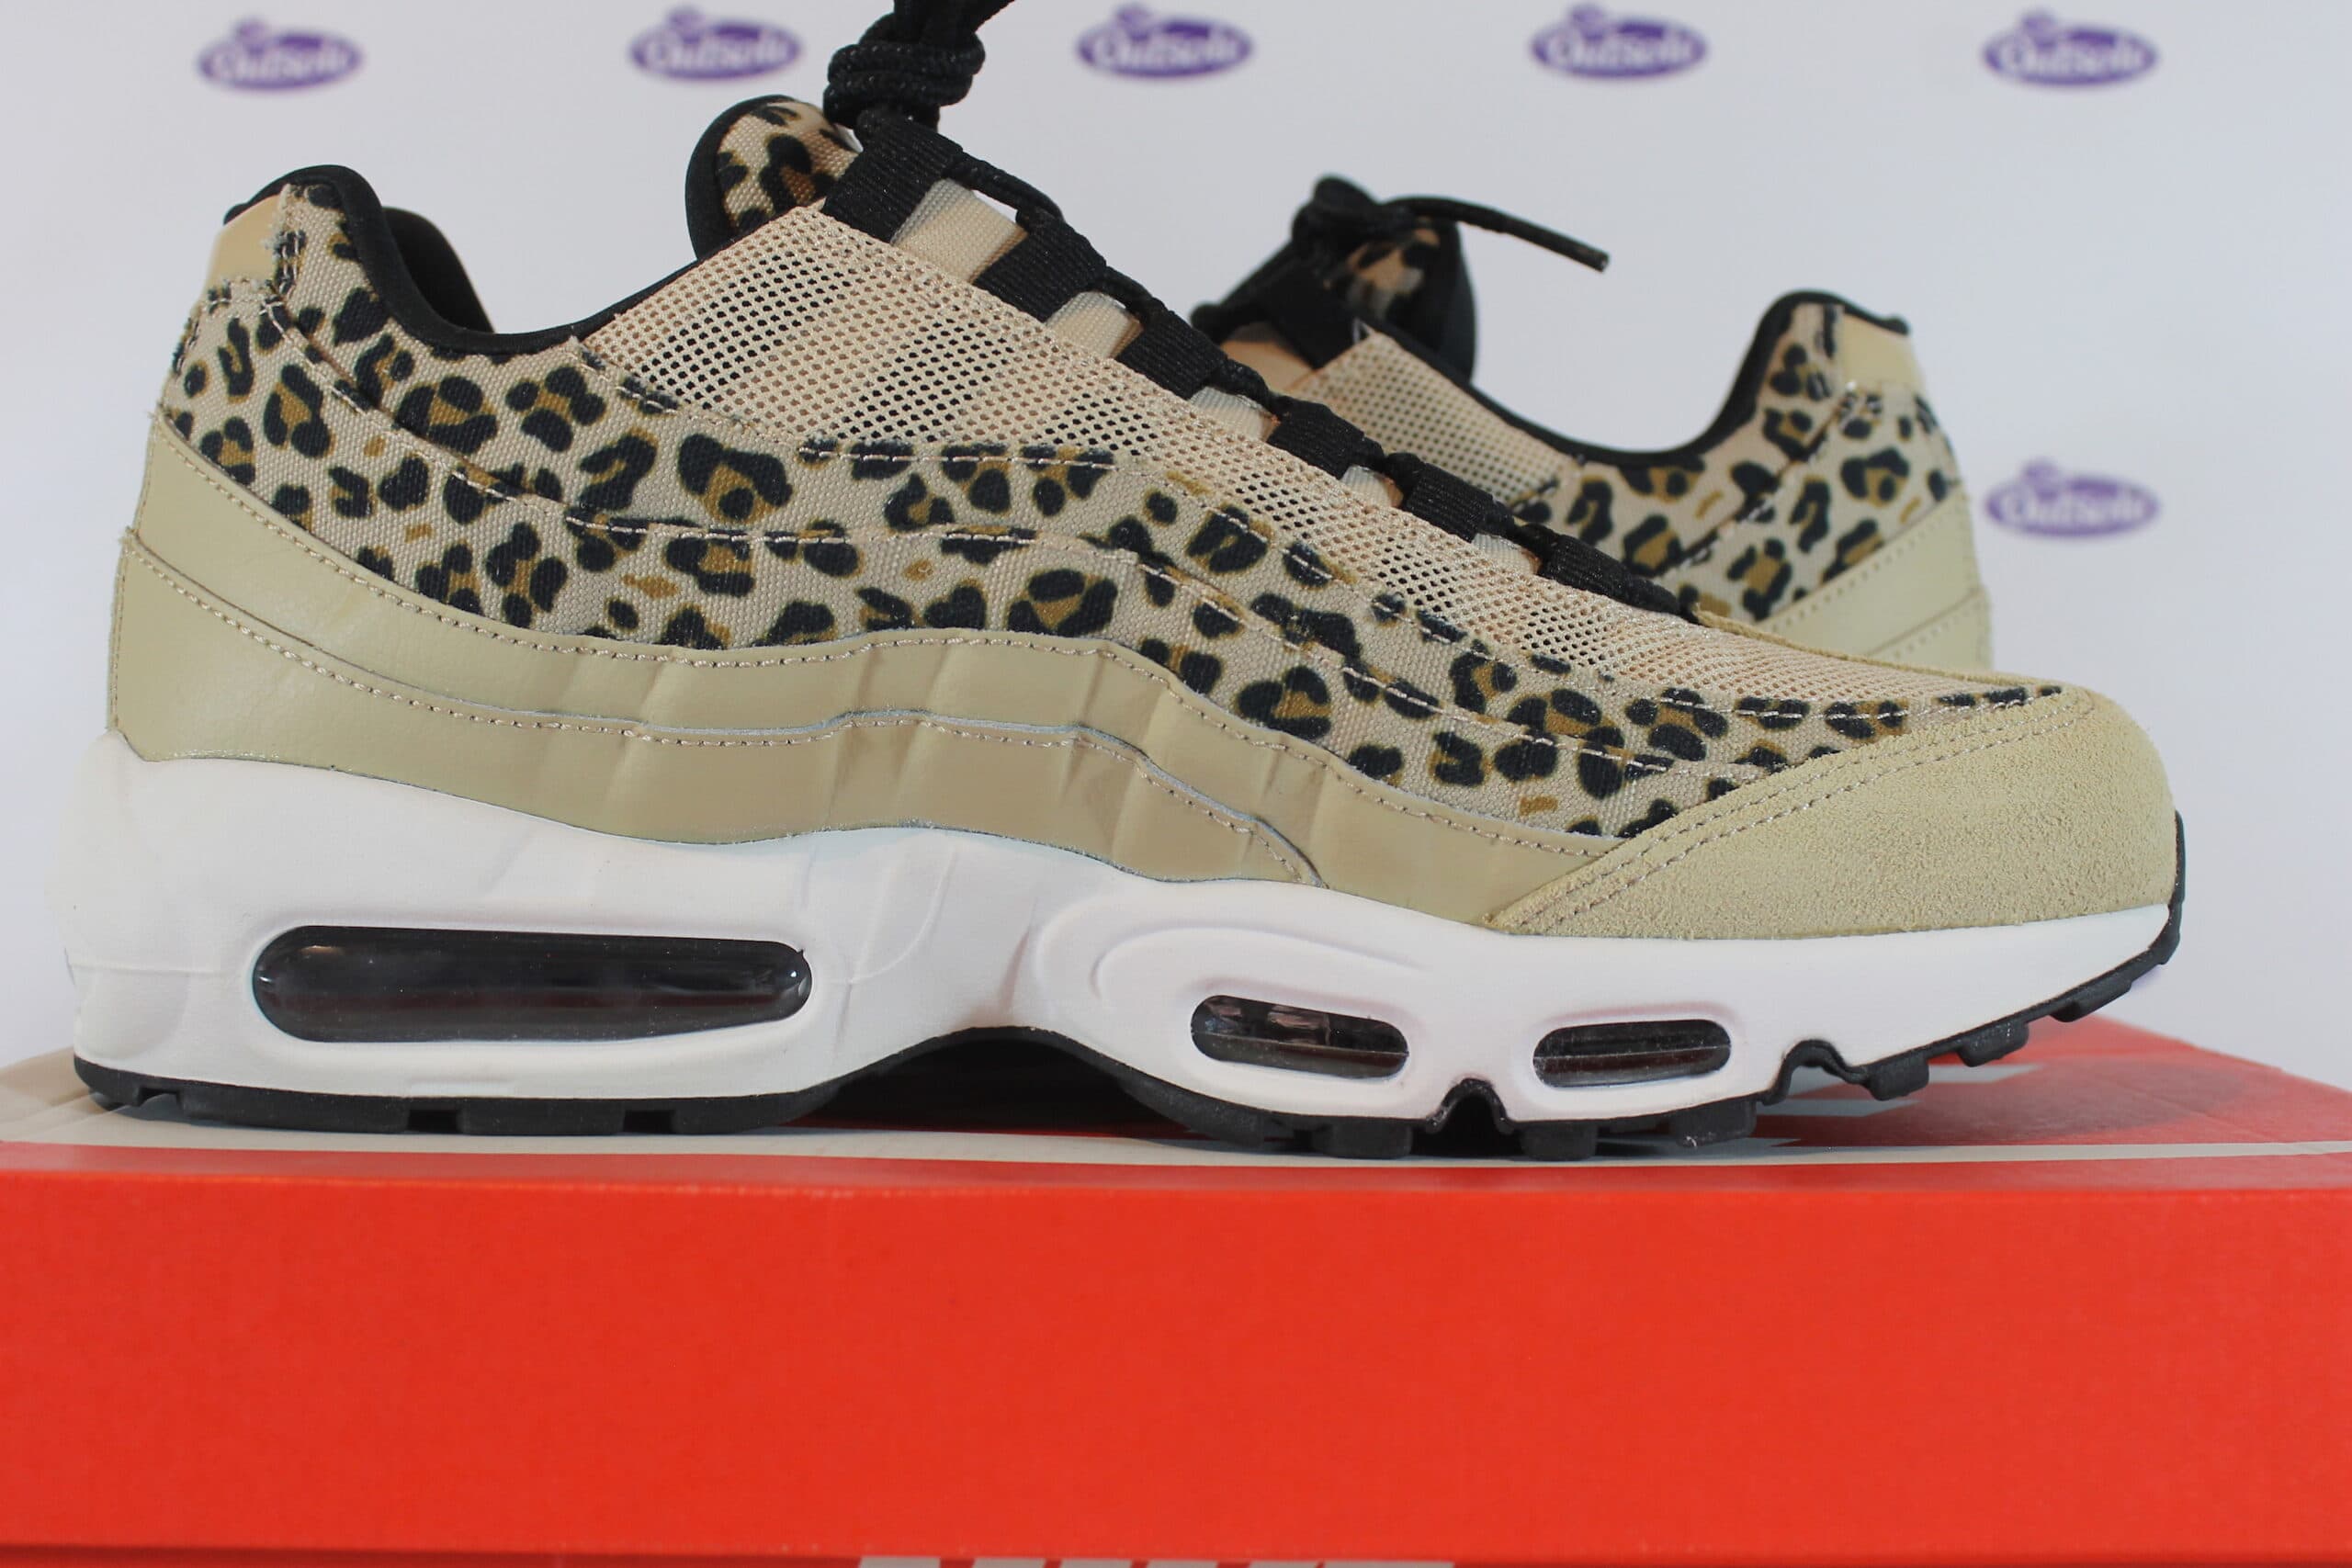 typist Hechting Doe mee Nike Air Max 95 Premium Leopard • ✓ In stock at Outsole